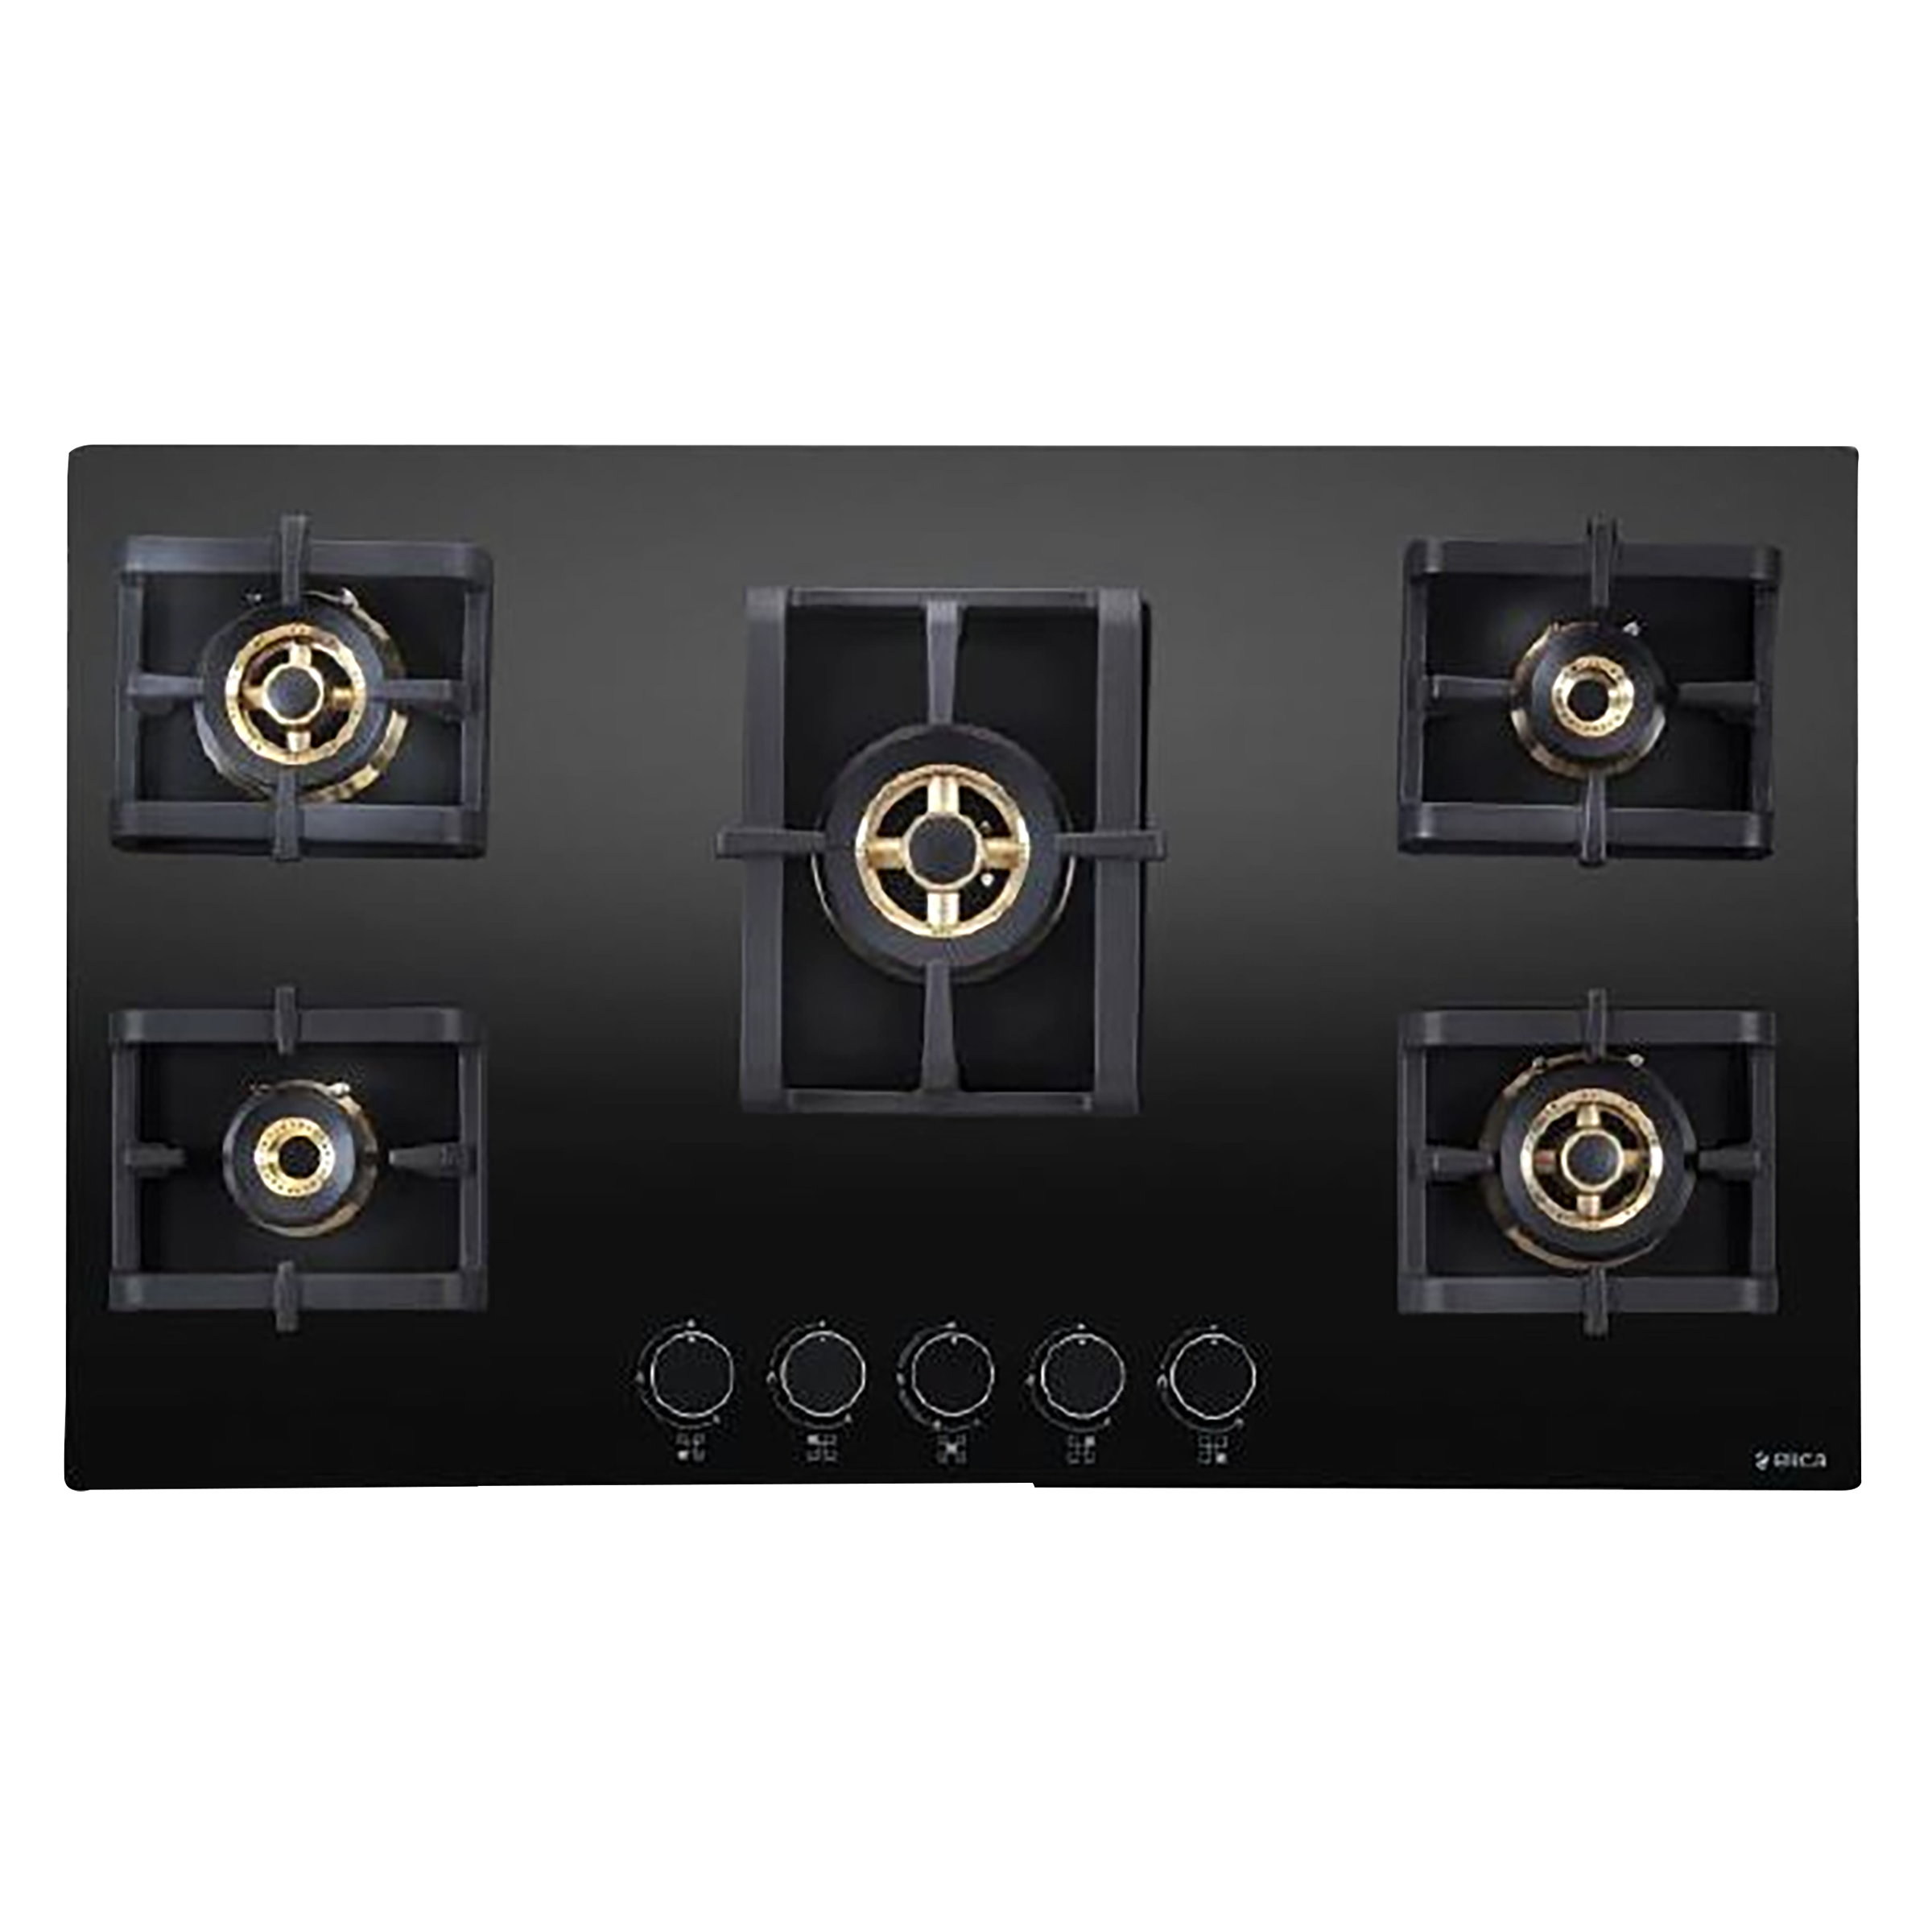 Elica Pro FB 5 Burner Glass Built-in Gas Hob (Electric Auto Ignition, 3137, Black)_1